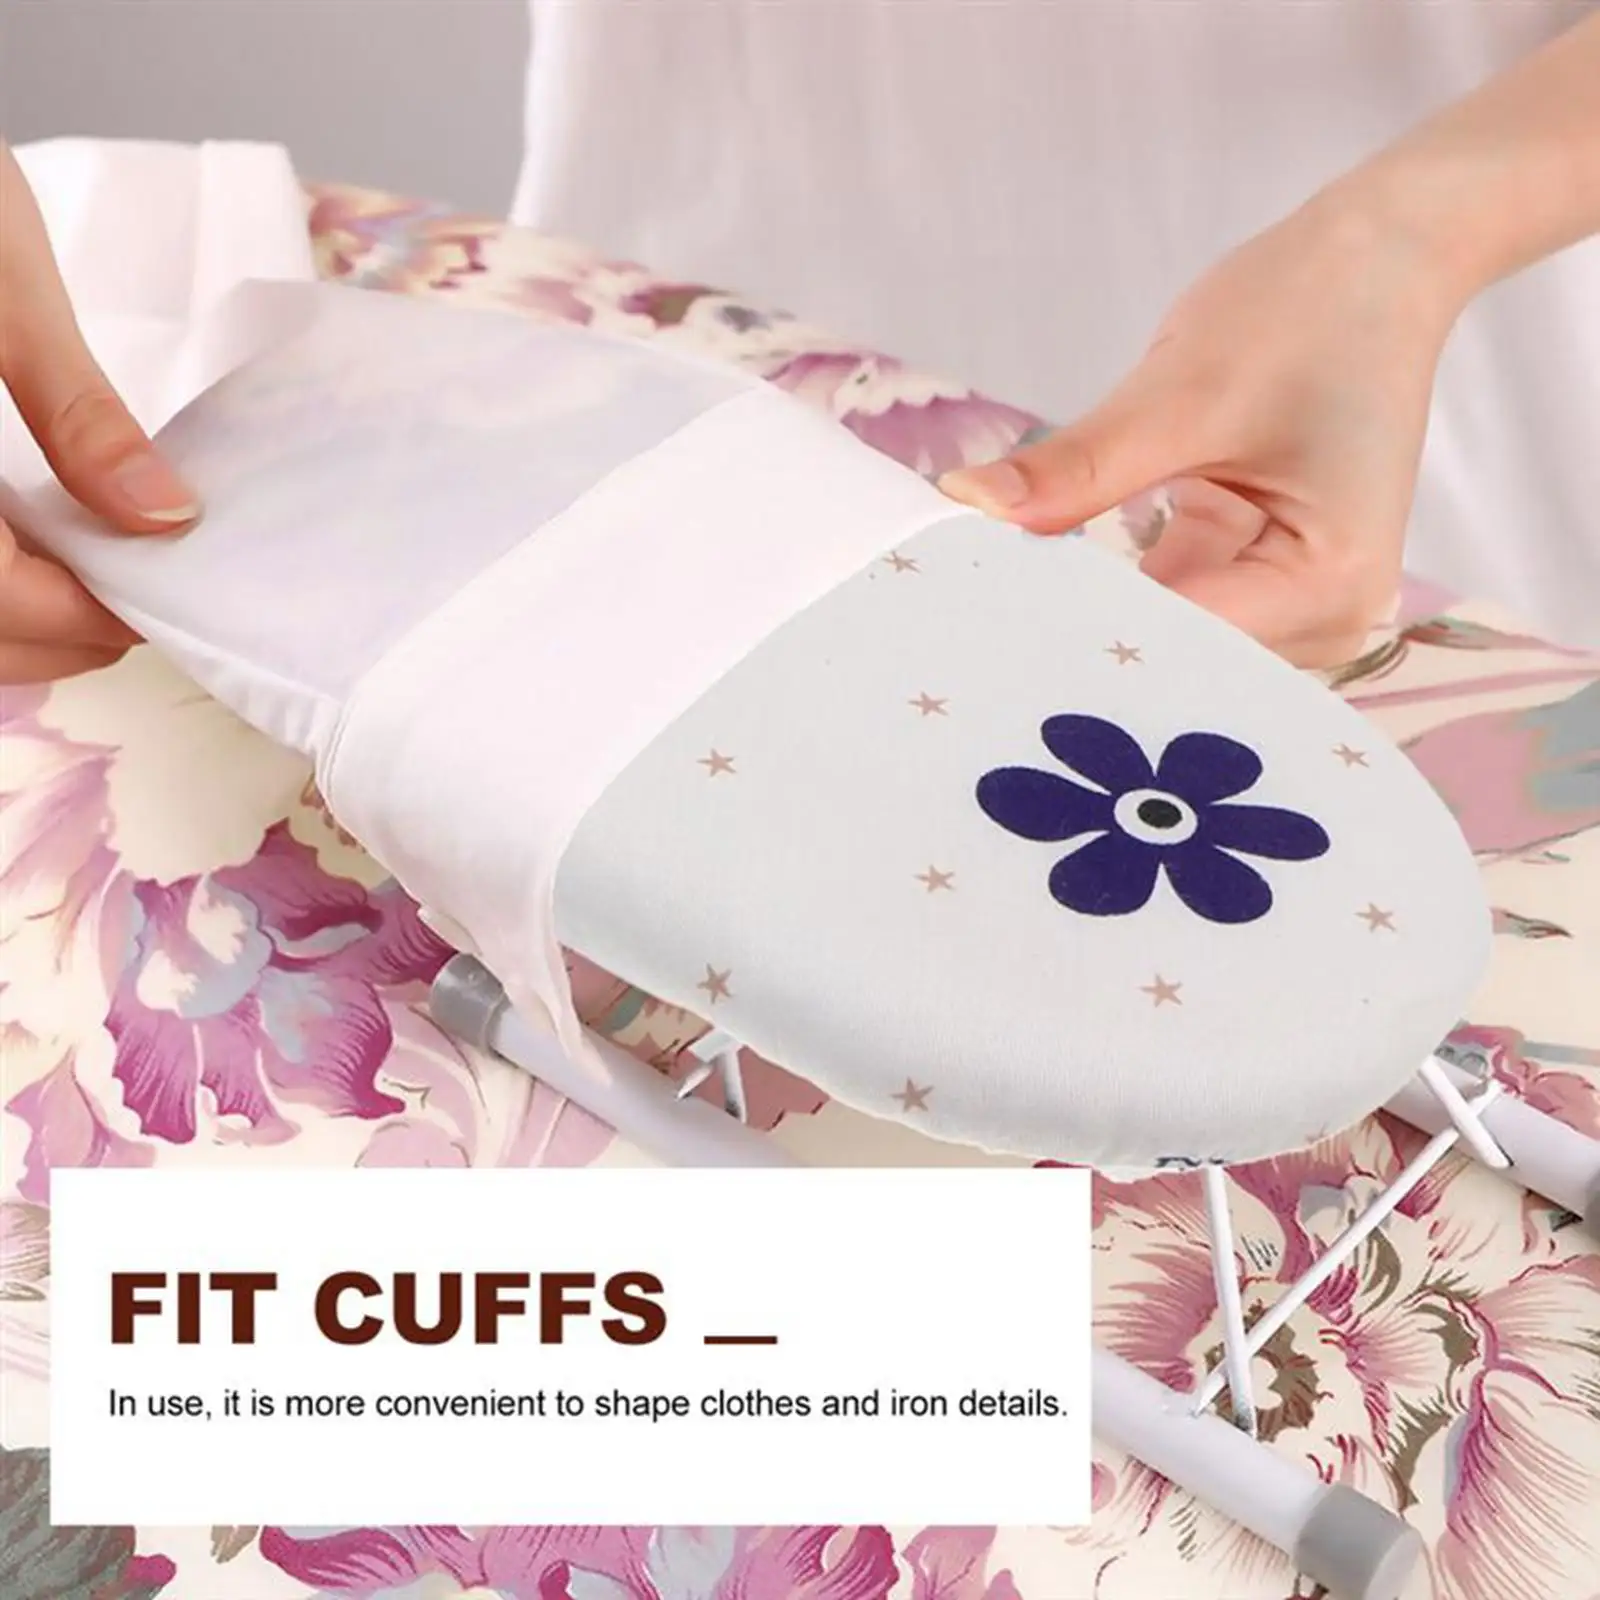 Portable Ironing Board Folding Mini Ironing Cover for Household Home Dorms Room Ironing